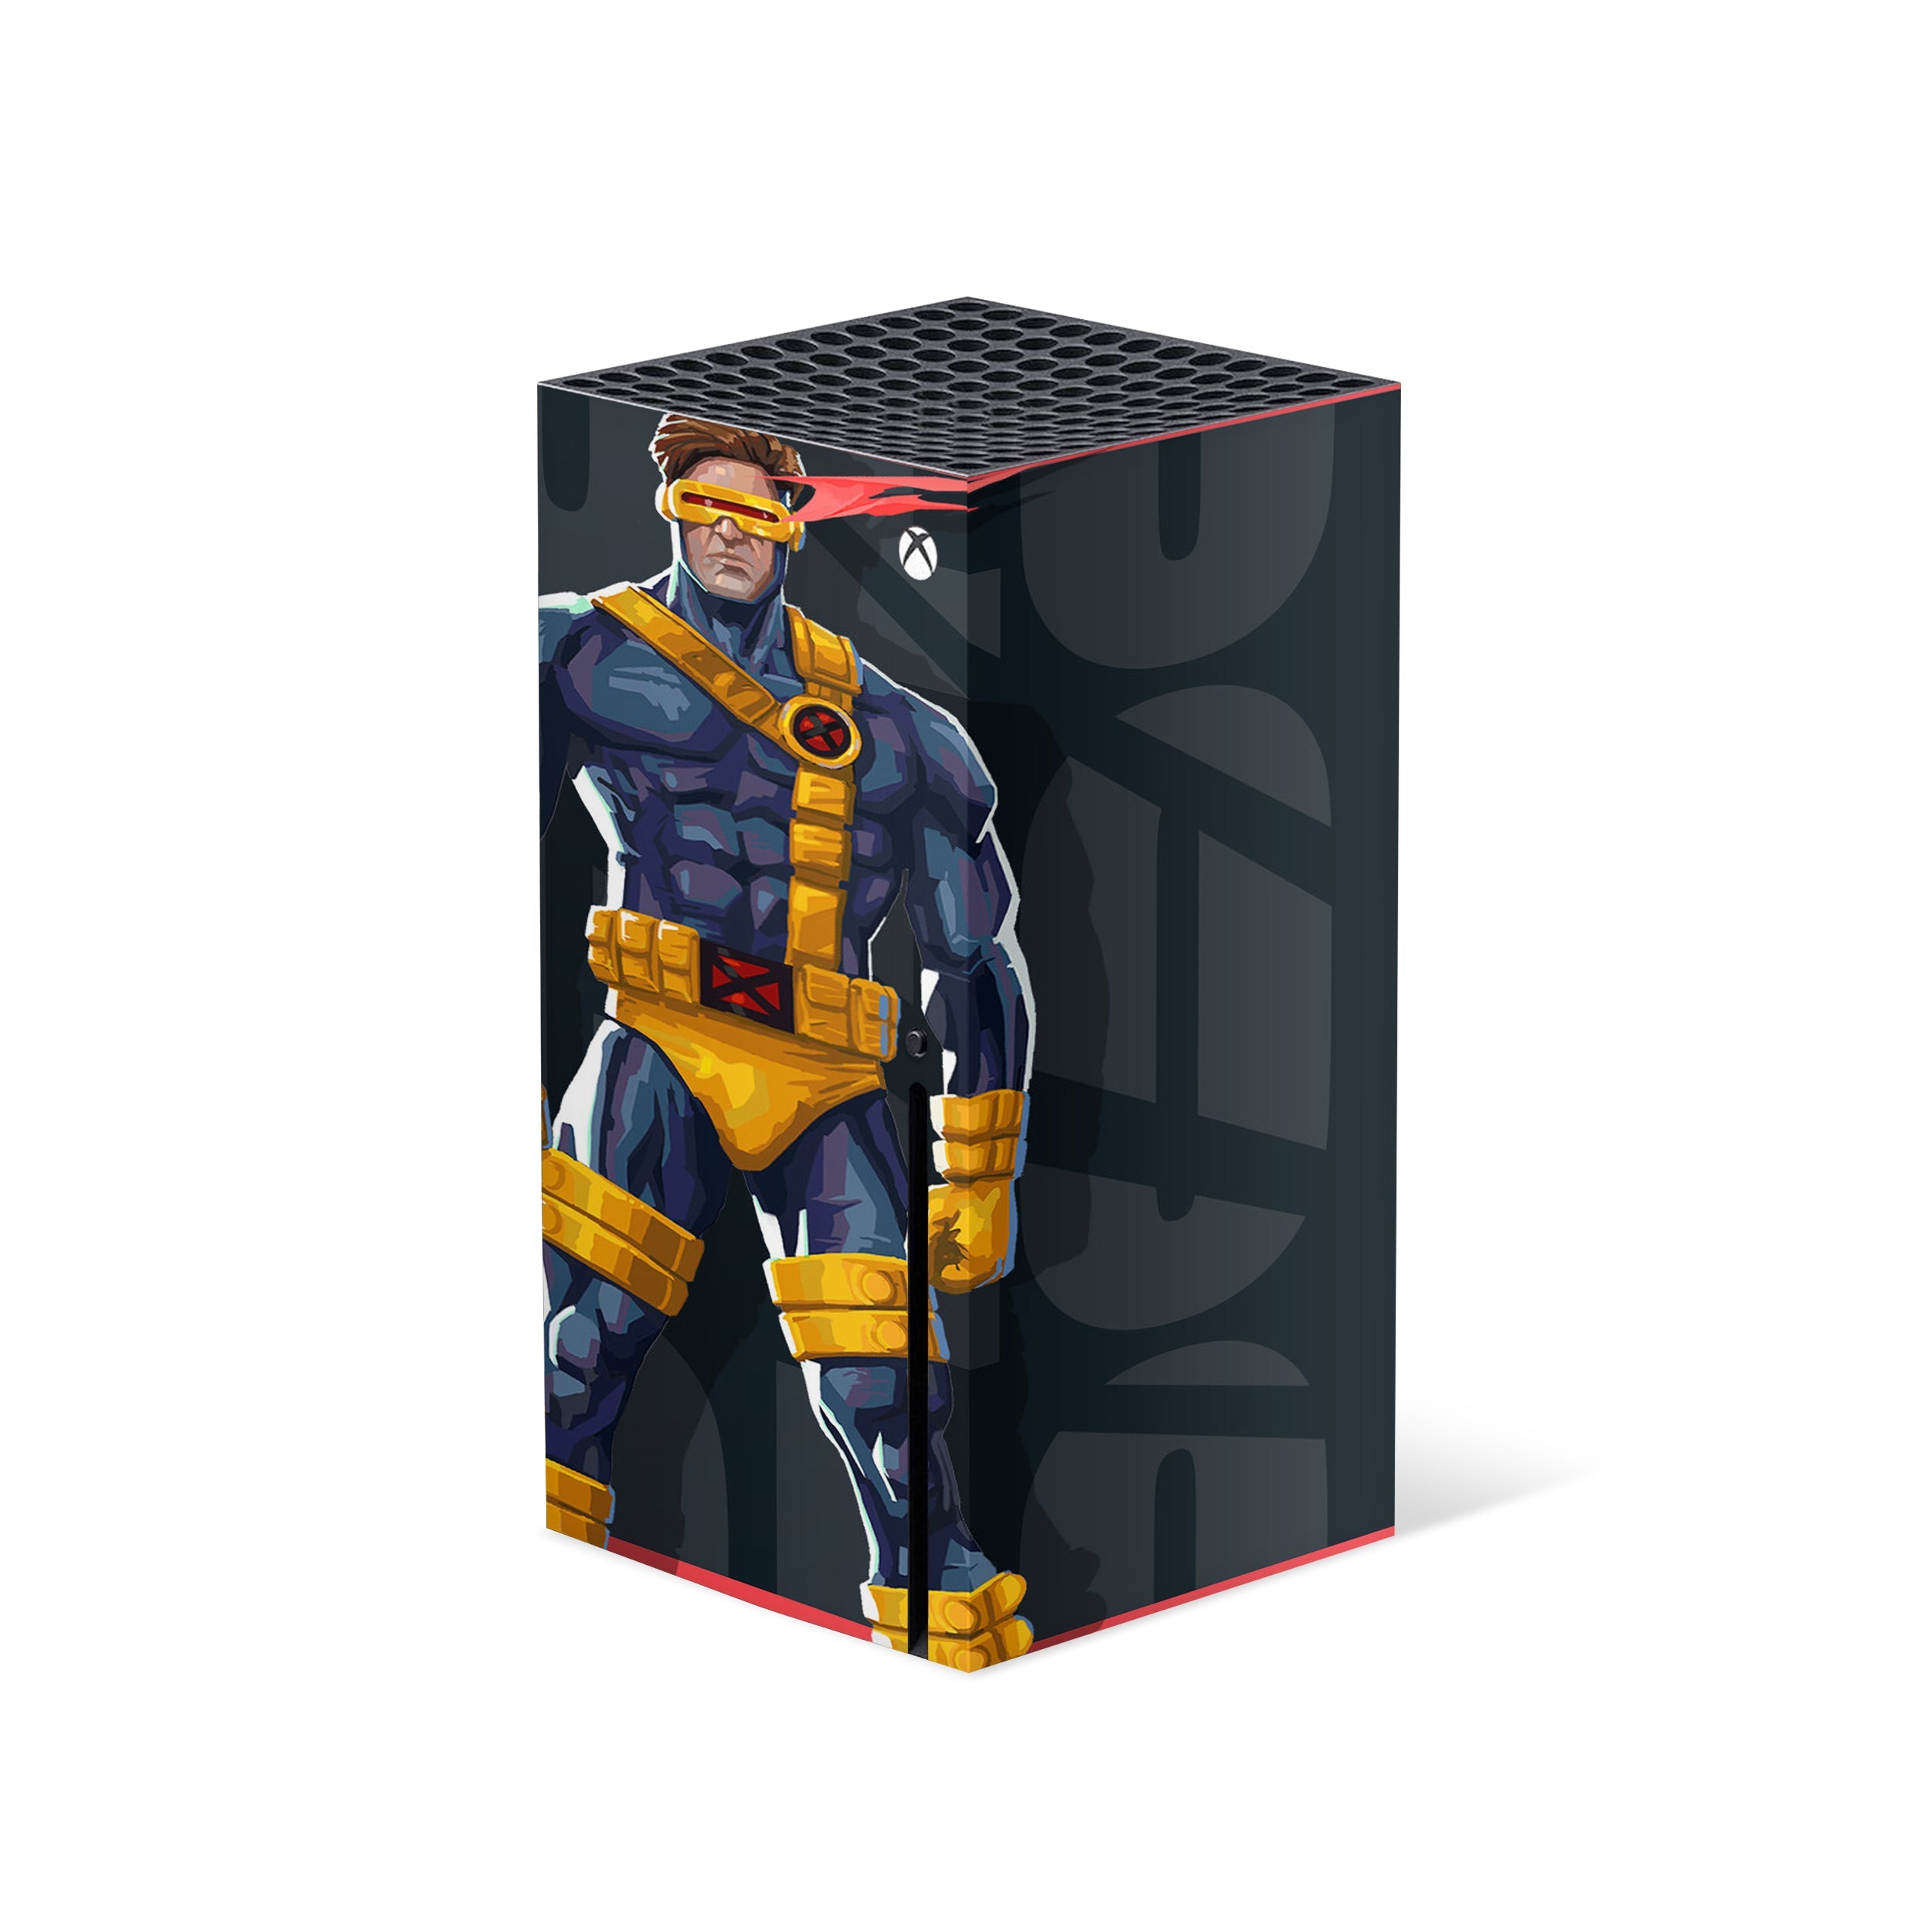 A video game skin featuring a Marvel Comics X Men Cyclops design for the Xbox Series X.